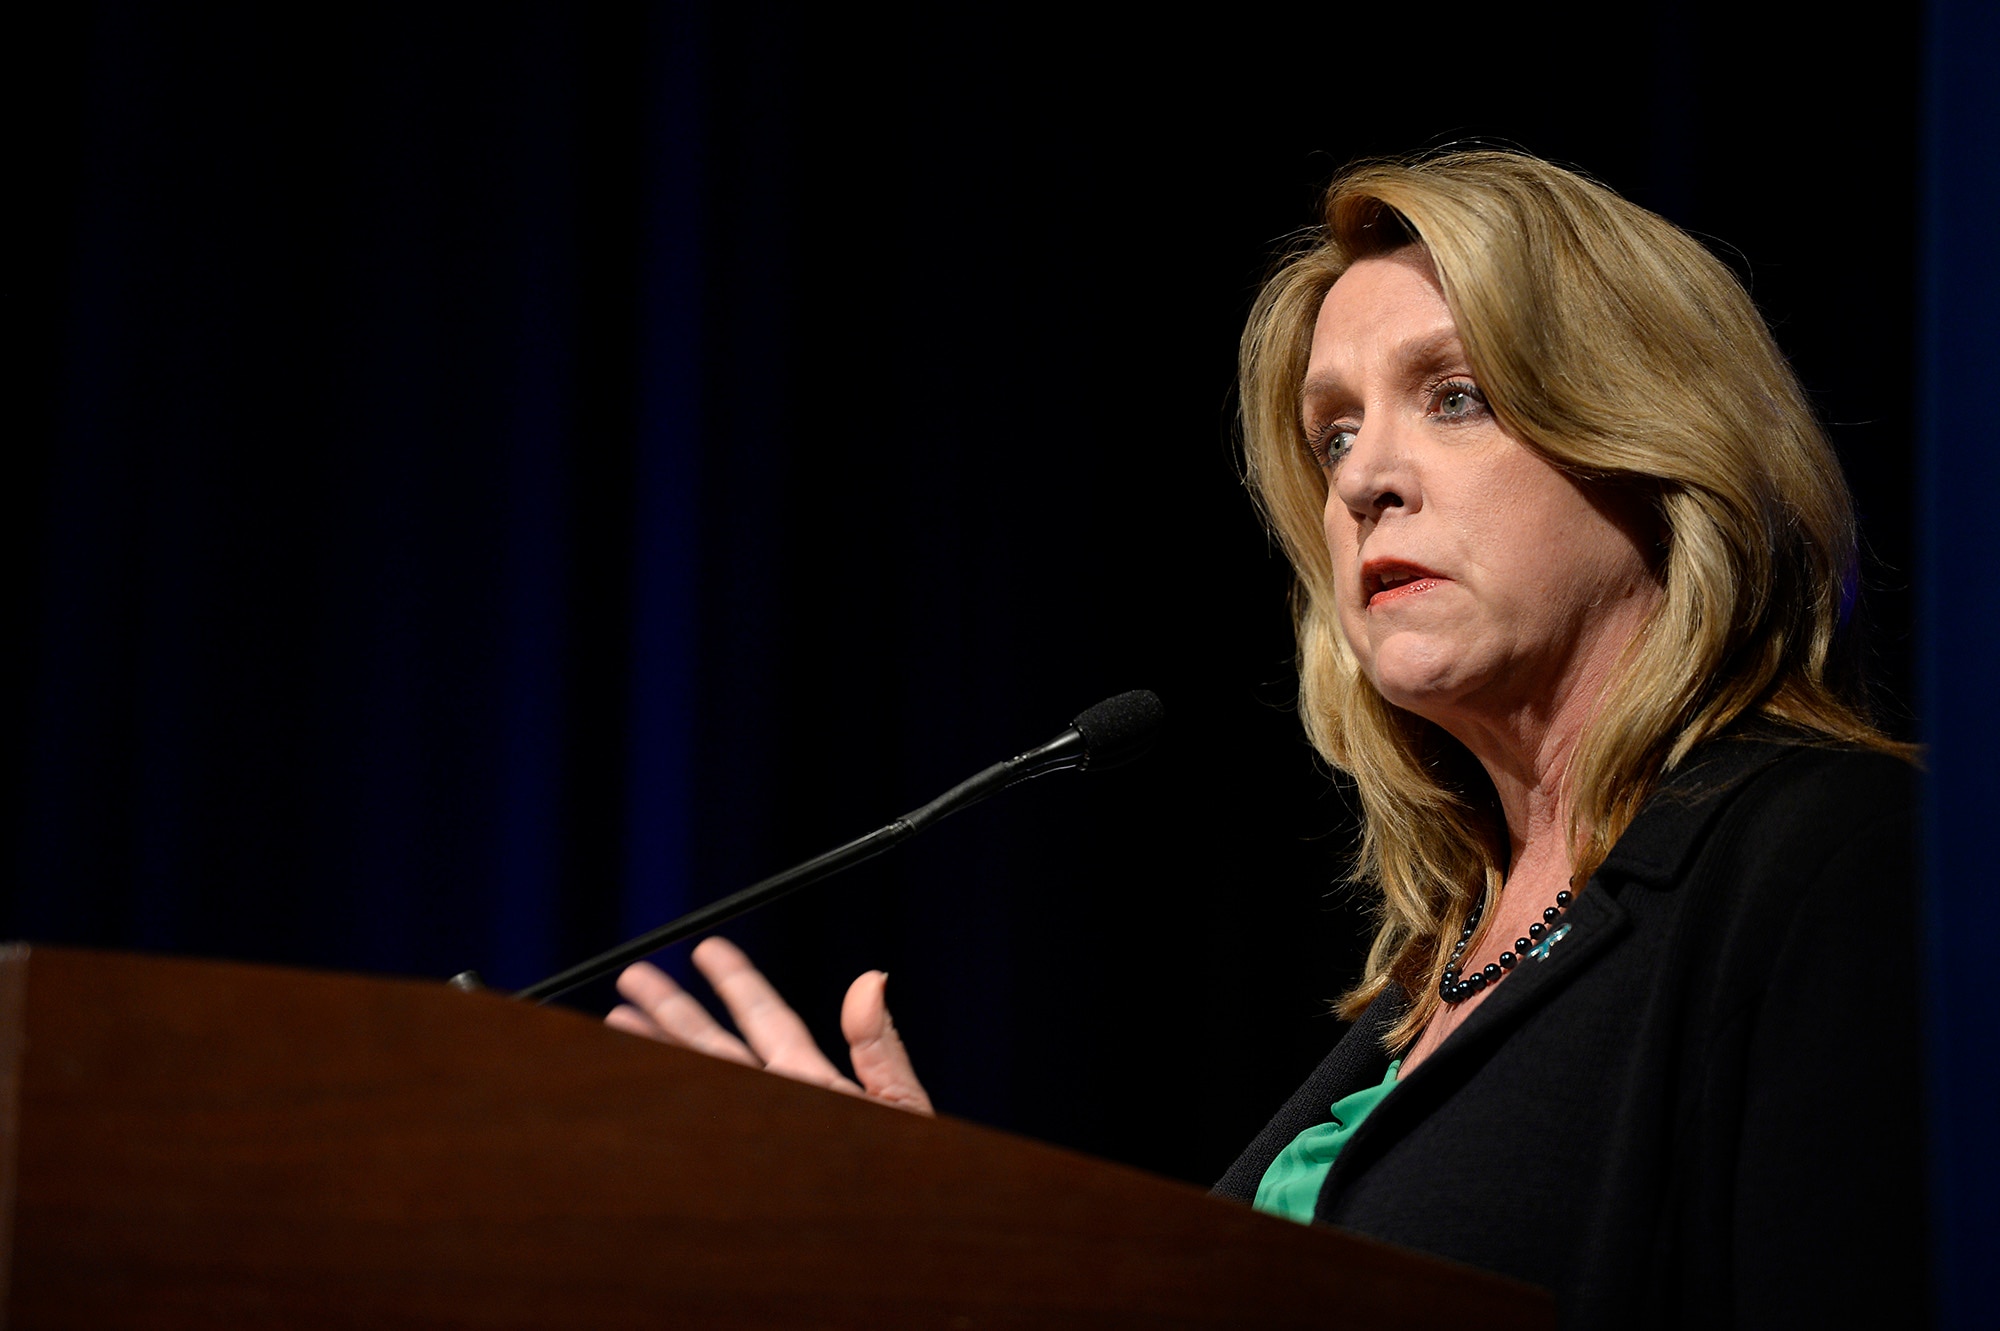 Air Force Secretary Deborah Lee James speaks about the wingman's role in sexual assault prevention during a special Sexual Assault Awareness Month event at the Pentagon March 17, 2016.  The event included participants who read actual victims' testimonials. (U.S. Air Force photo/Scott M. Ash)